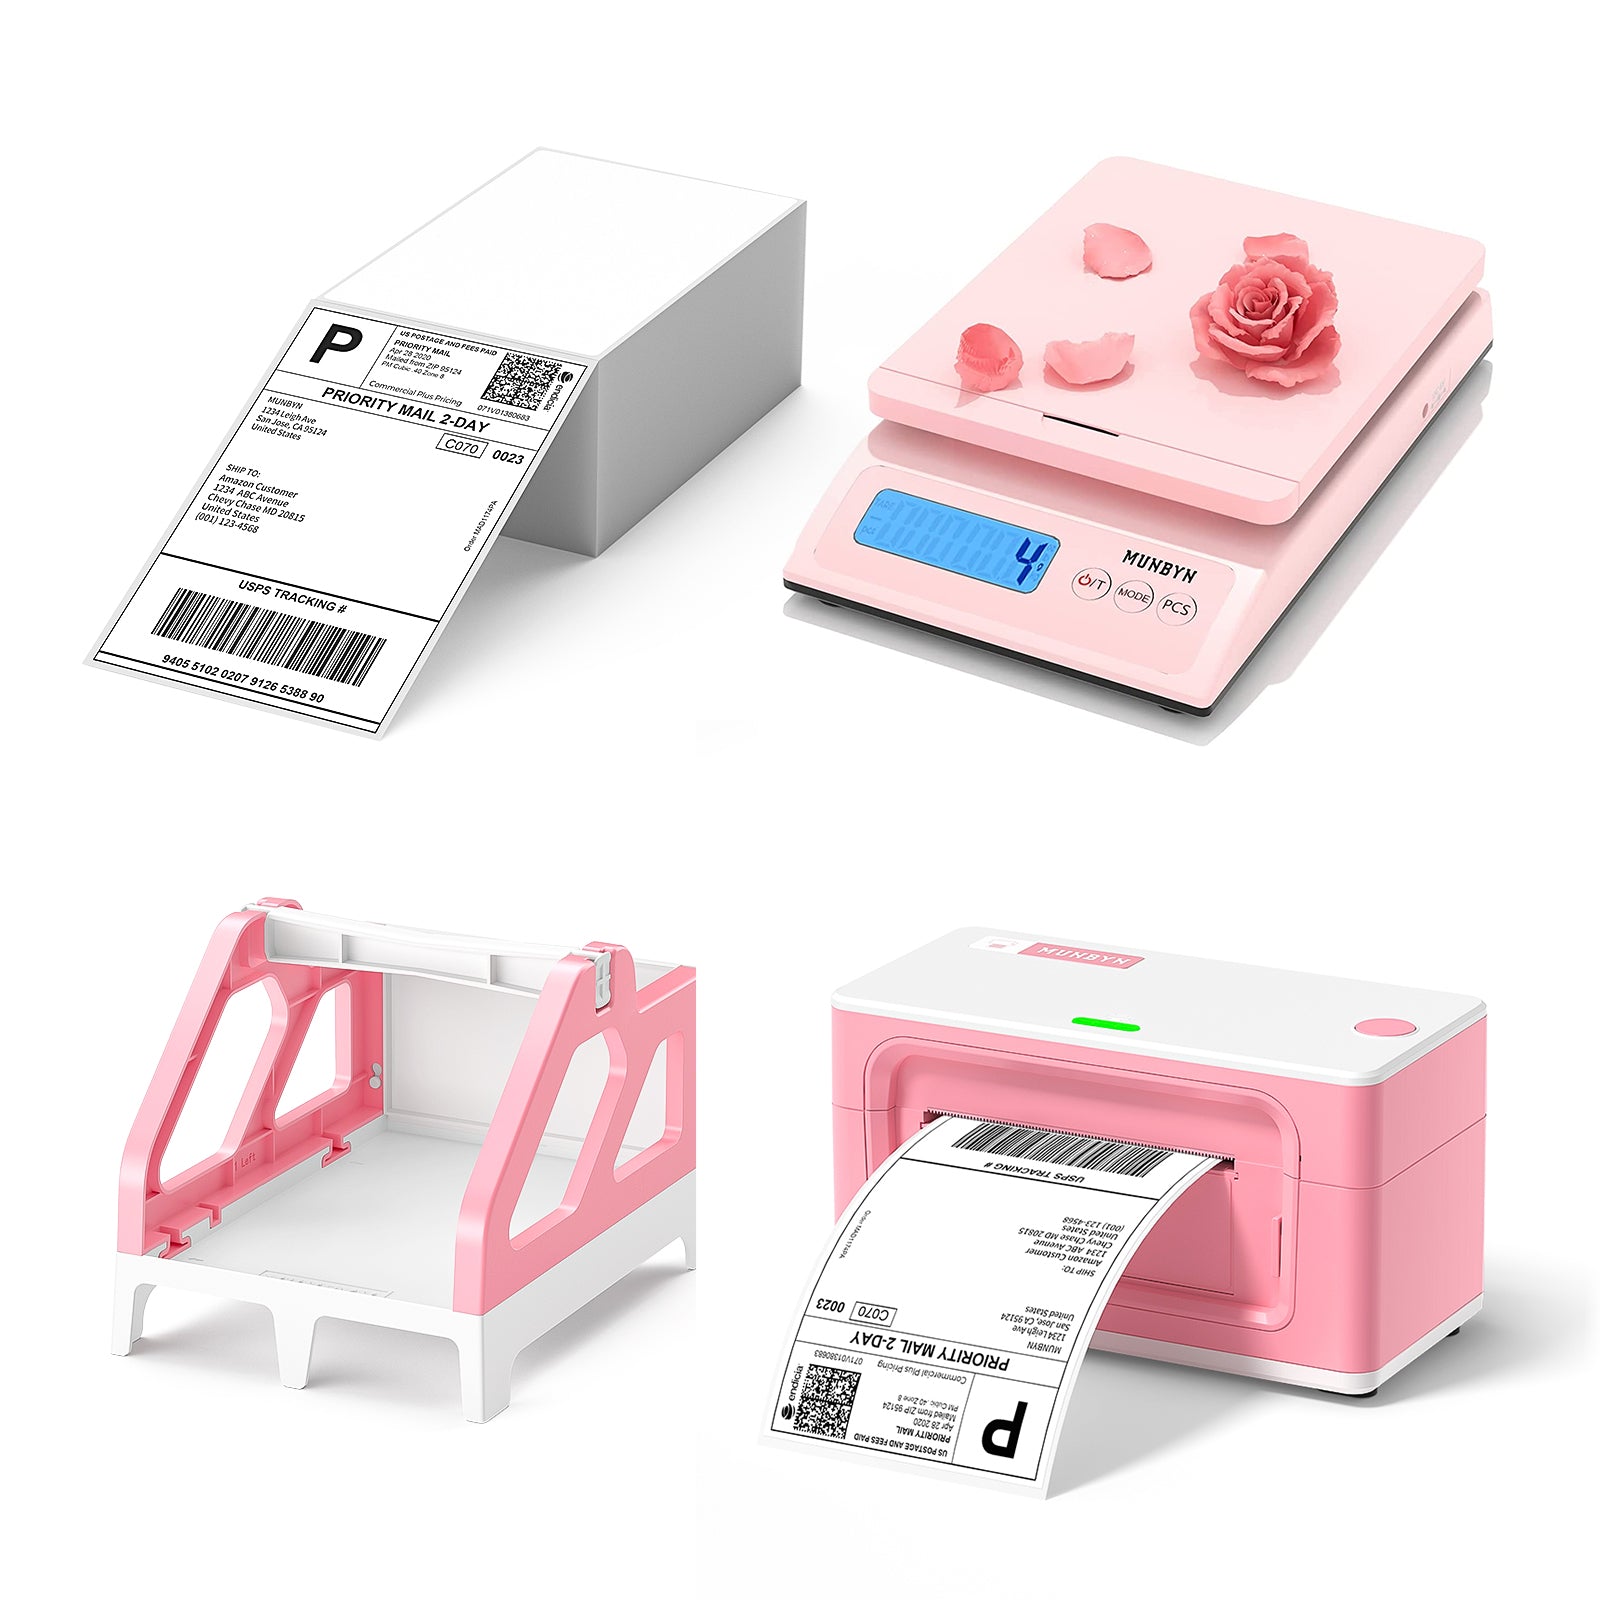 The MUNBYN pink thermal printer kit includes a stack of shipping labels, a pink postage scale, a pink label holder and a pink thermal printer.